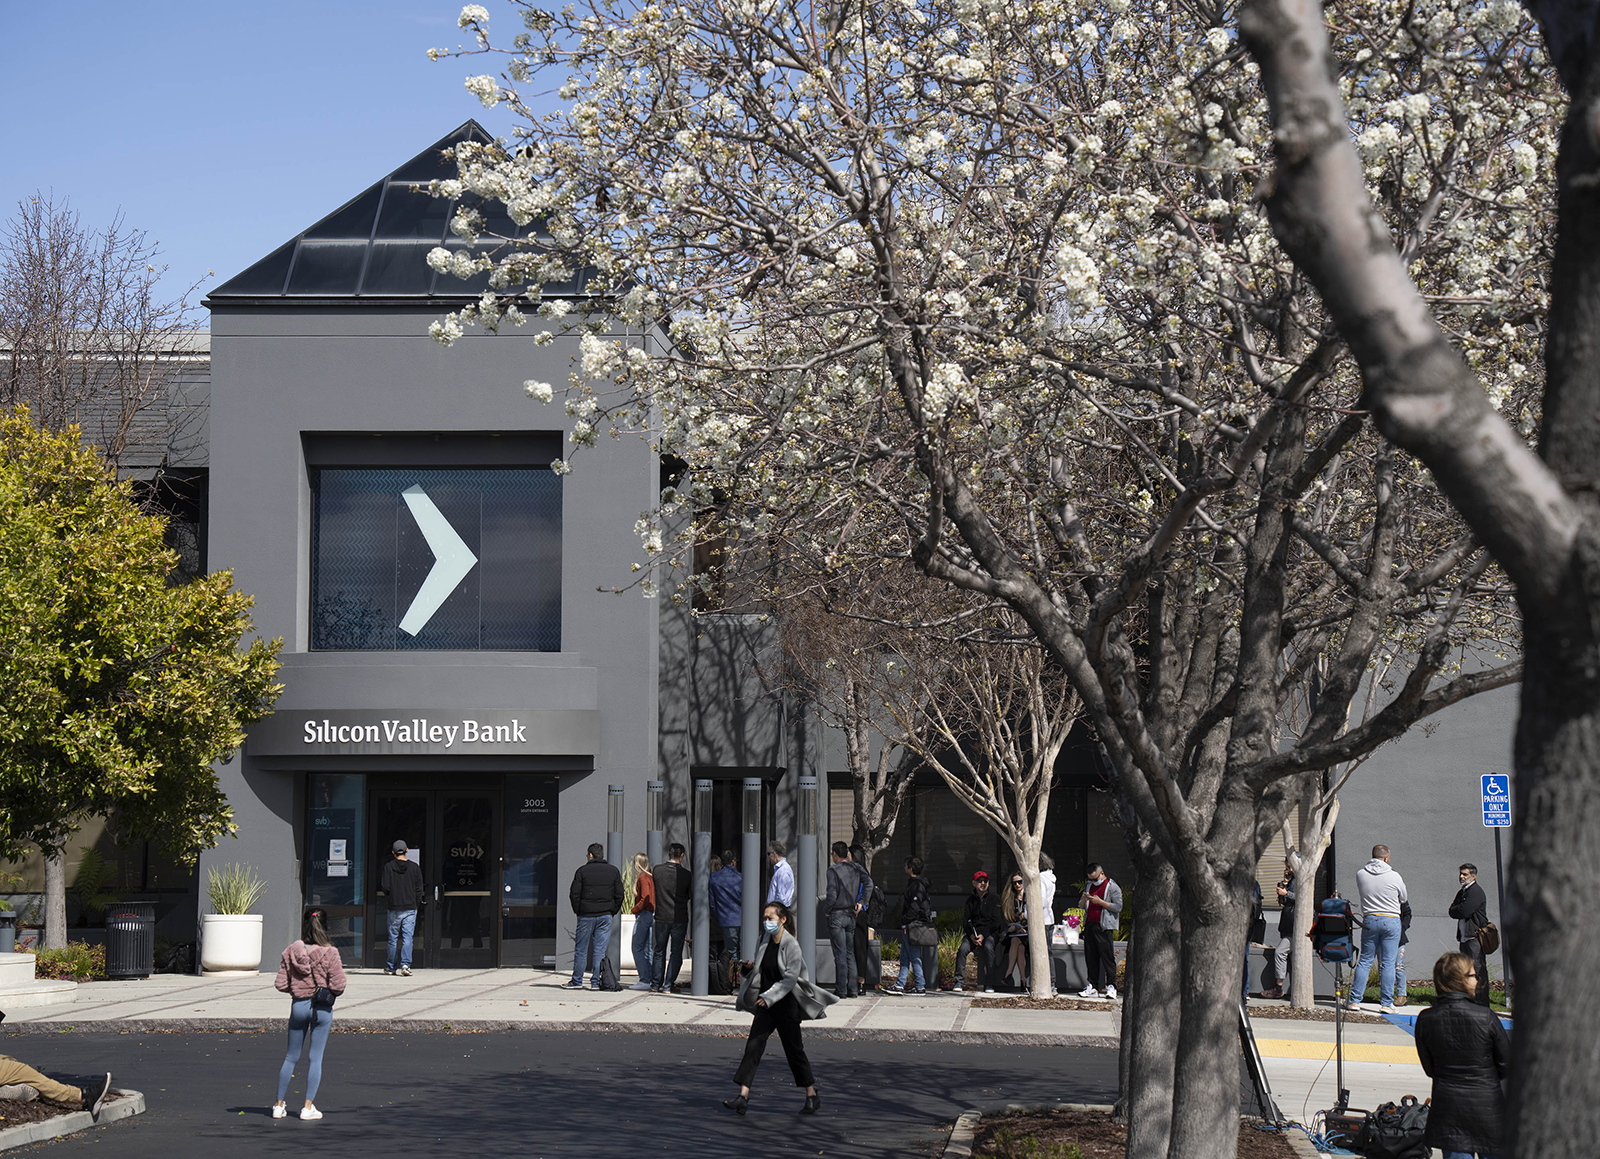 People queue up outside the headquarters of the Silicon Valley Bank (SVB) in Santa Clara, California, on March 13.